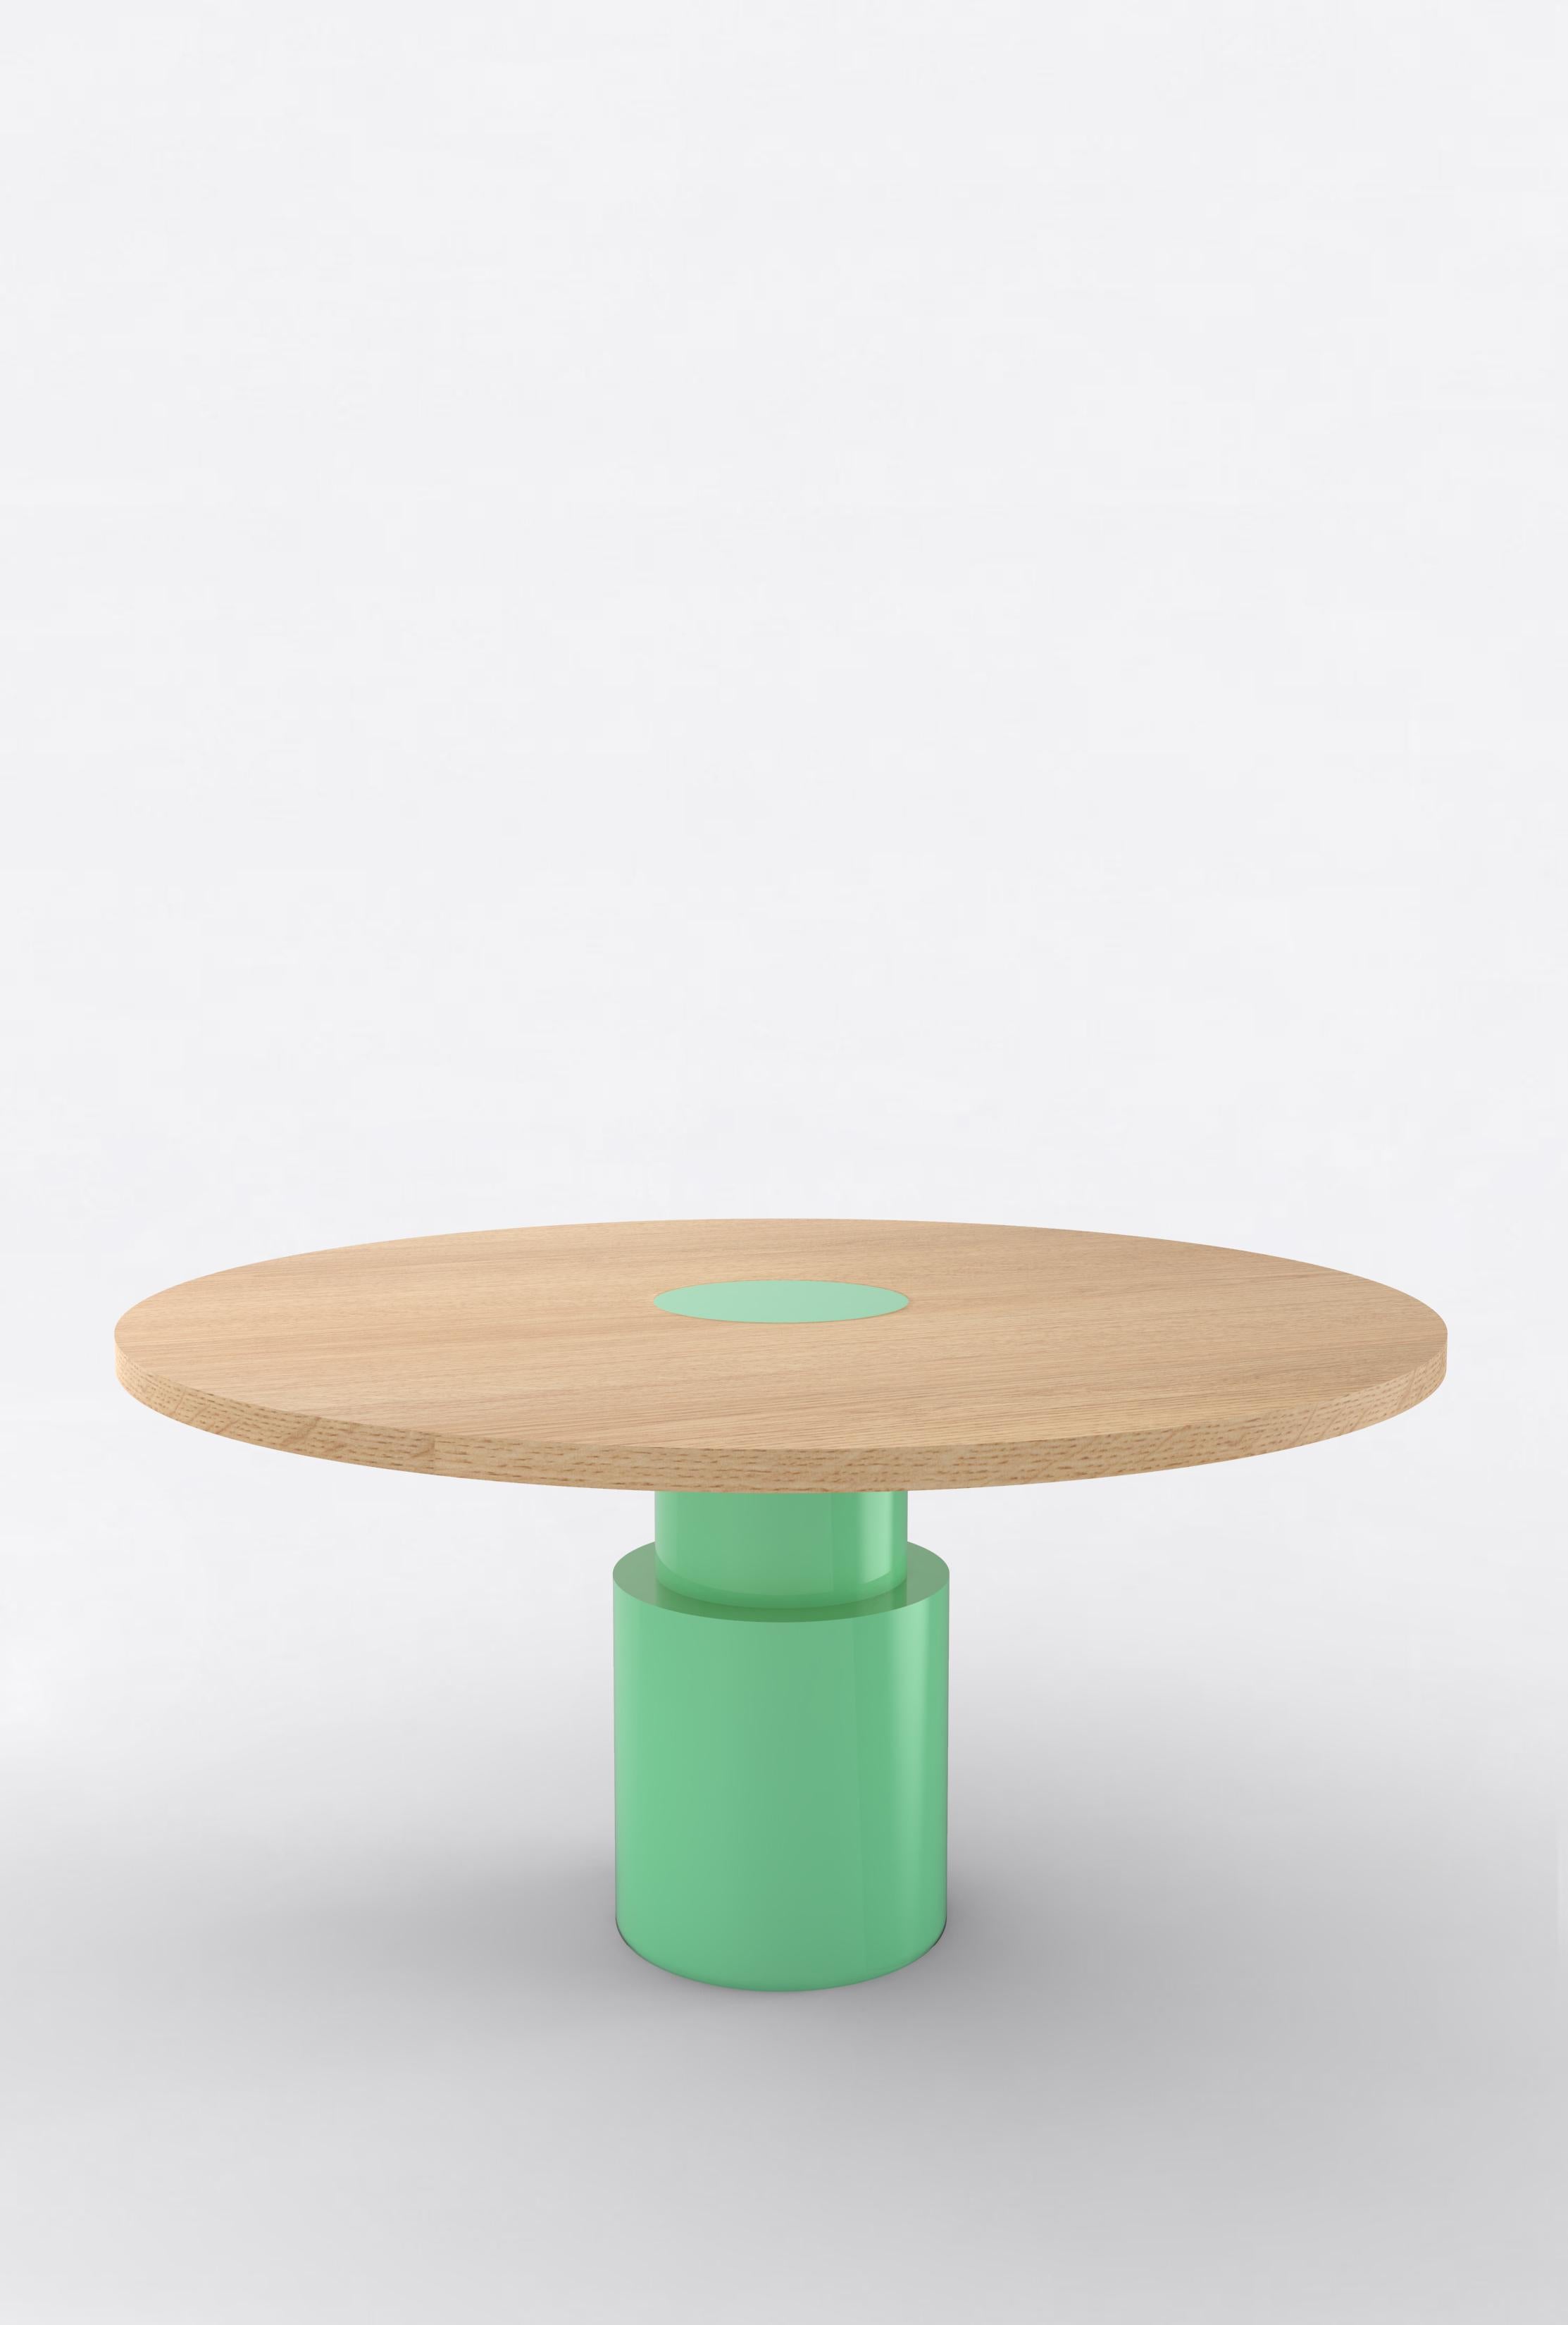 Contemporary 100C Dining Table in Oak and Color by Orphan Work, 2020 In New Condition For Sale In Los Angeles, CA